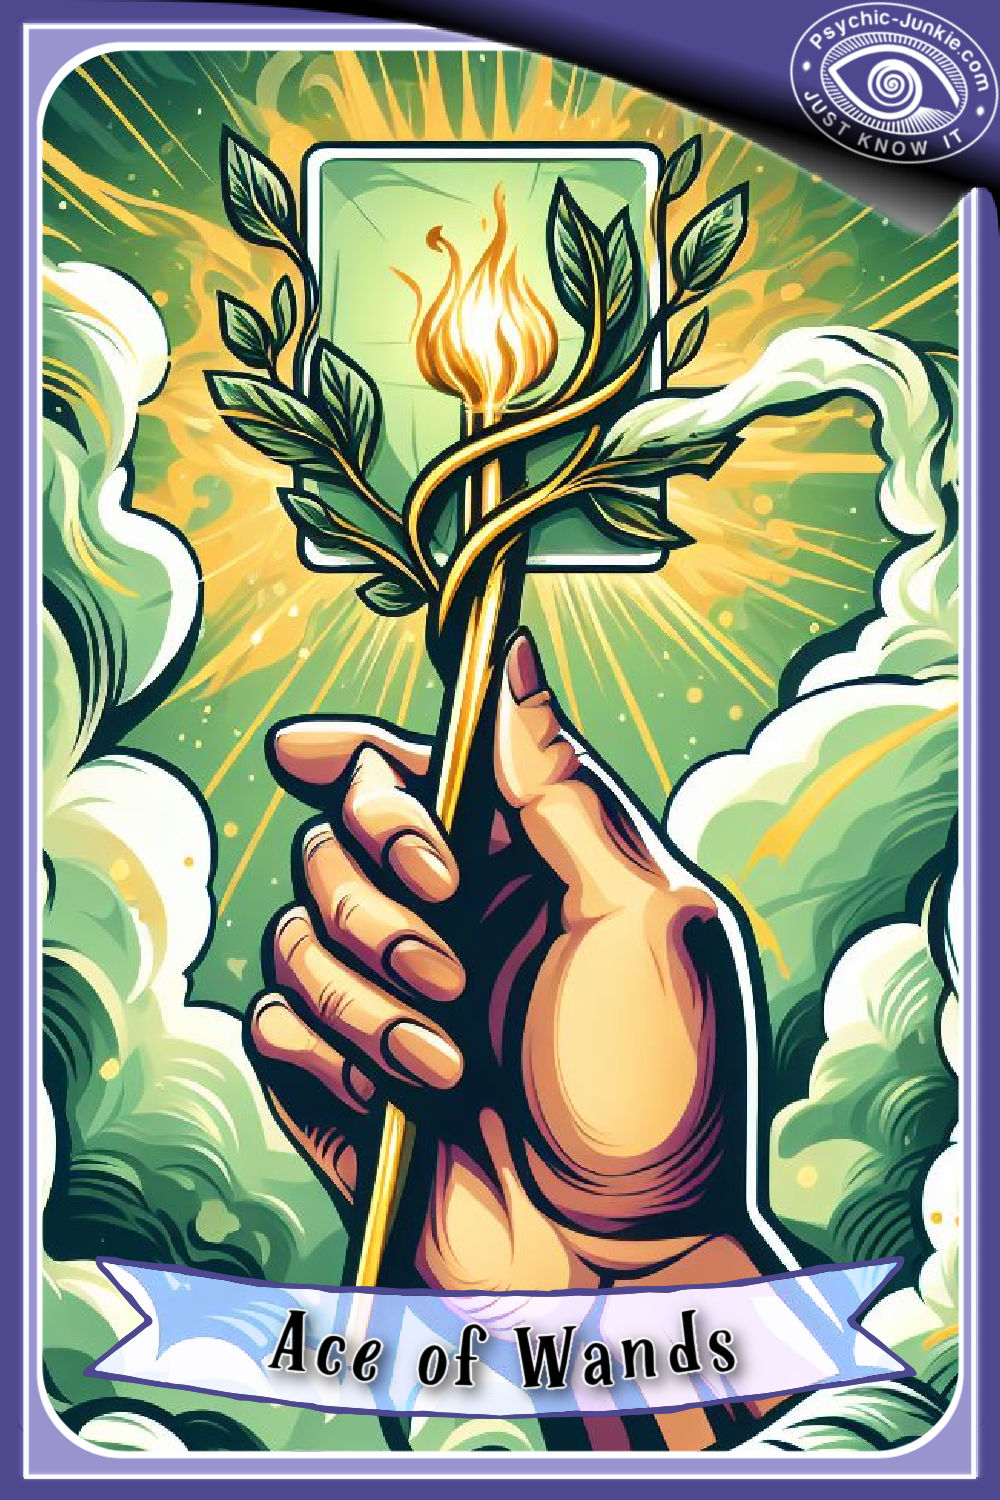 My AI Version Of The Ace of Wands Tarot Card